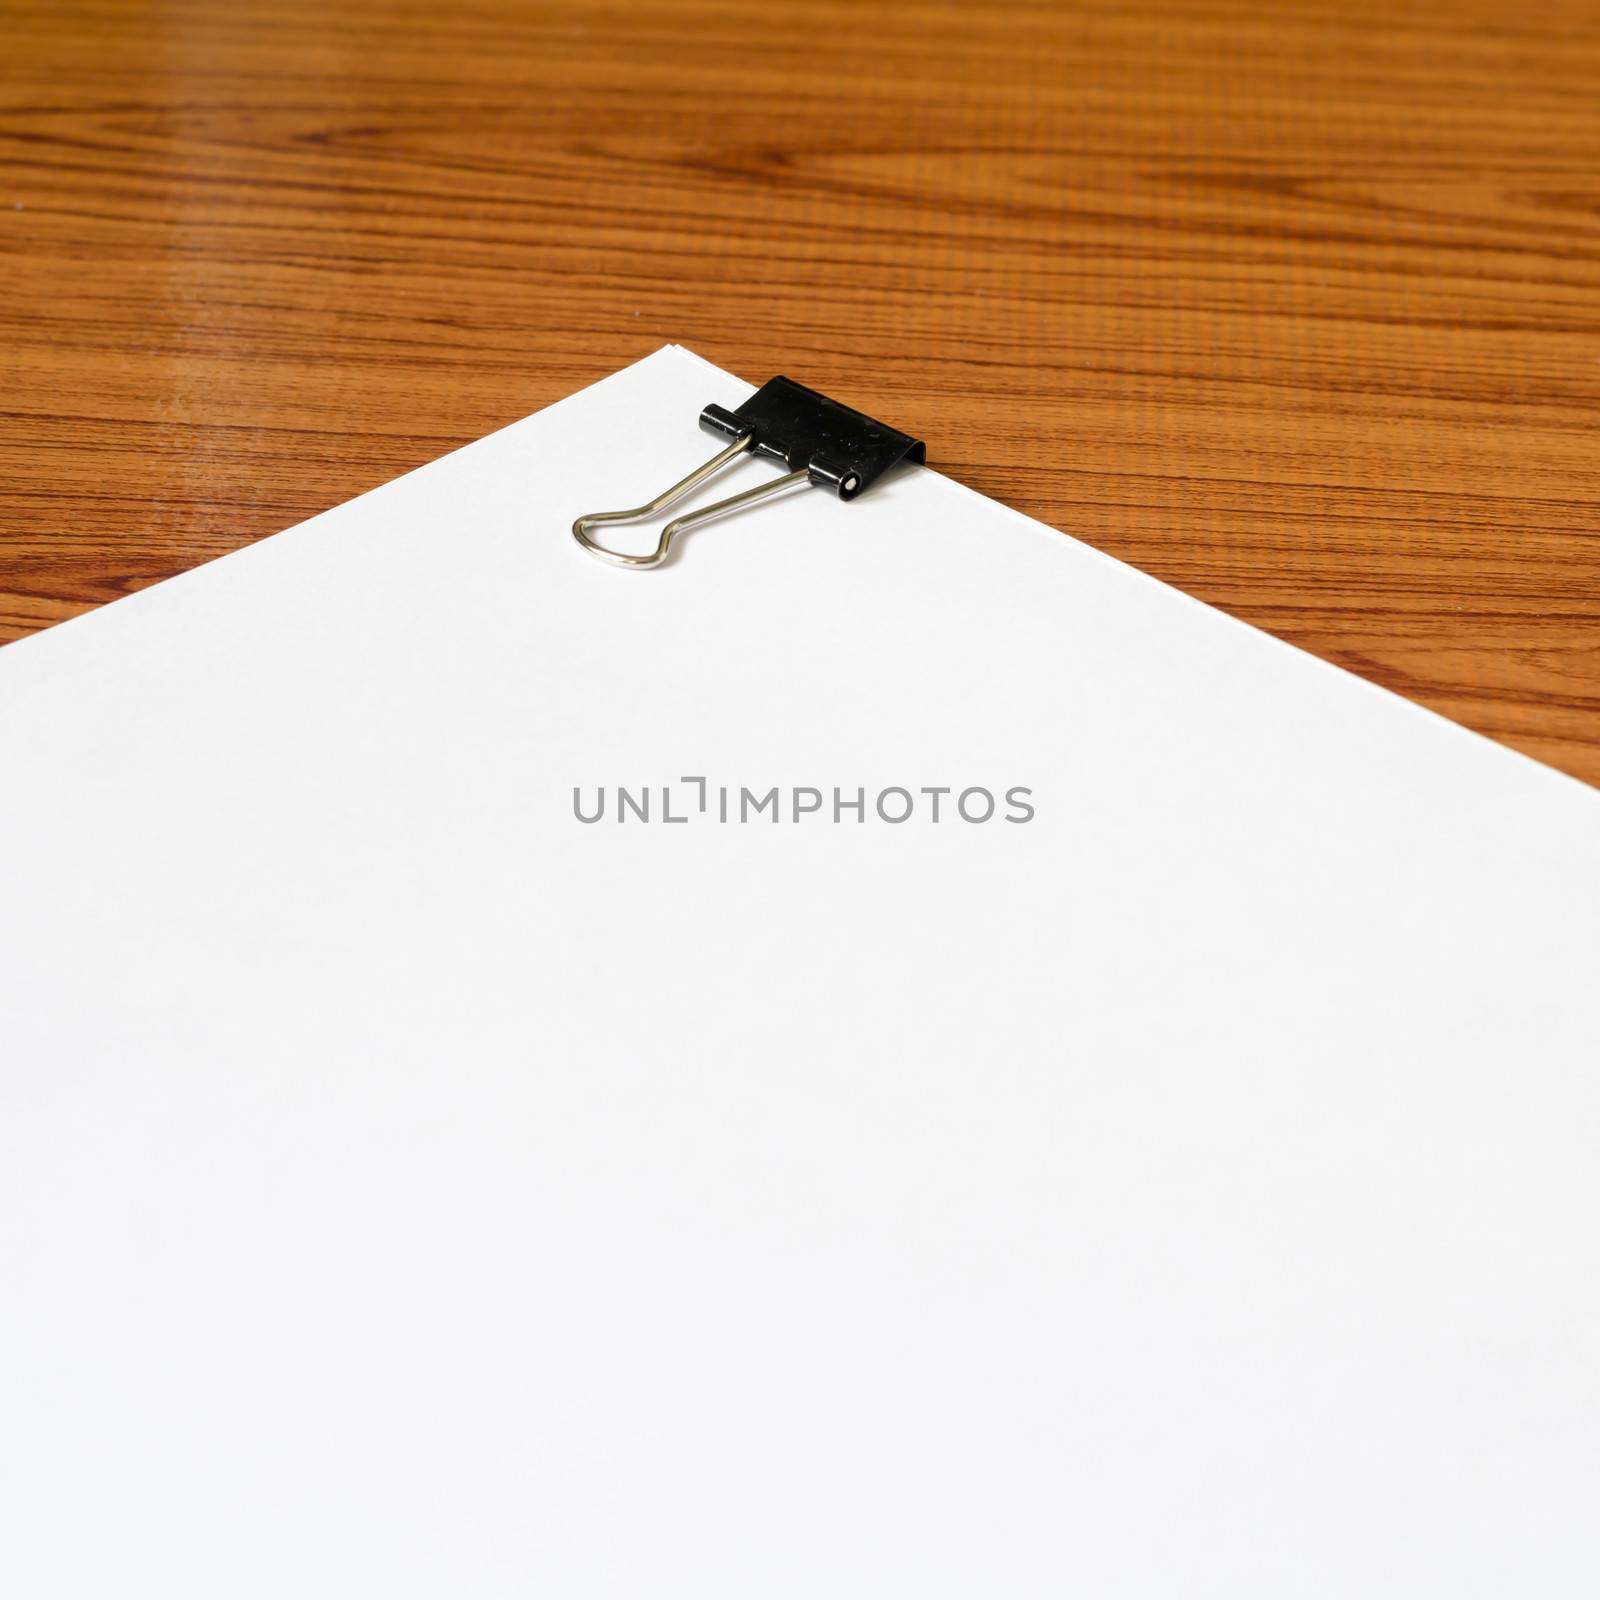 white paper on wood background